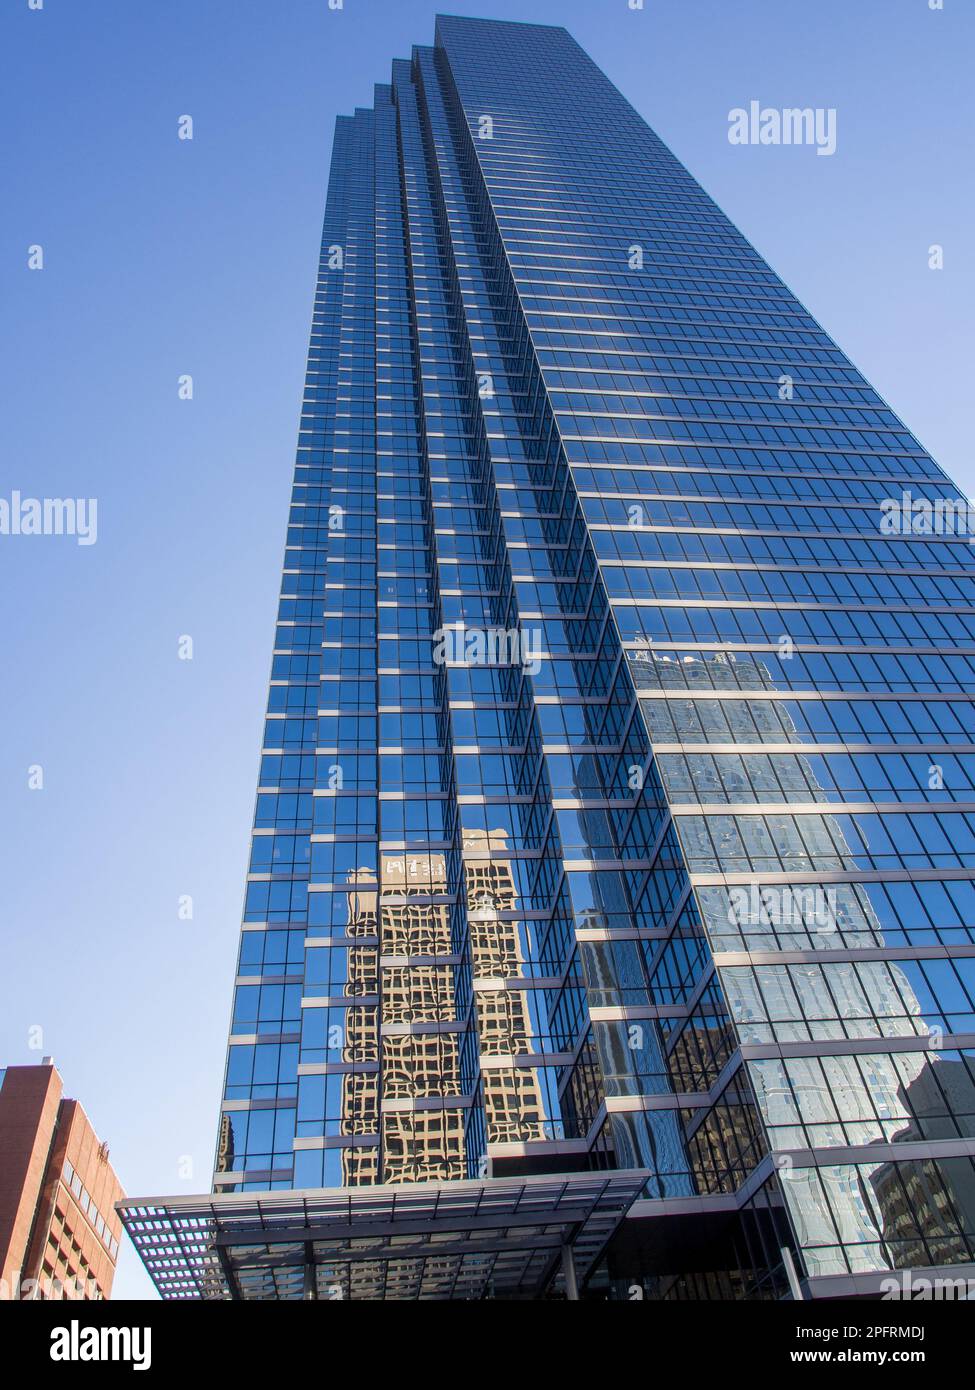 Immerse yourself in the breathtaking architecture of downtown Dallas with this stunning image of a skyscraper with a glass facade and reflections. Aga Stock Photo